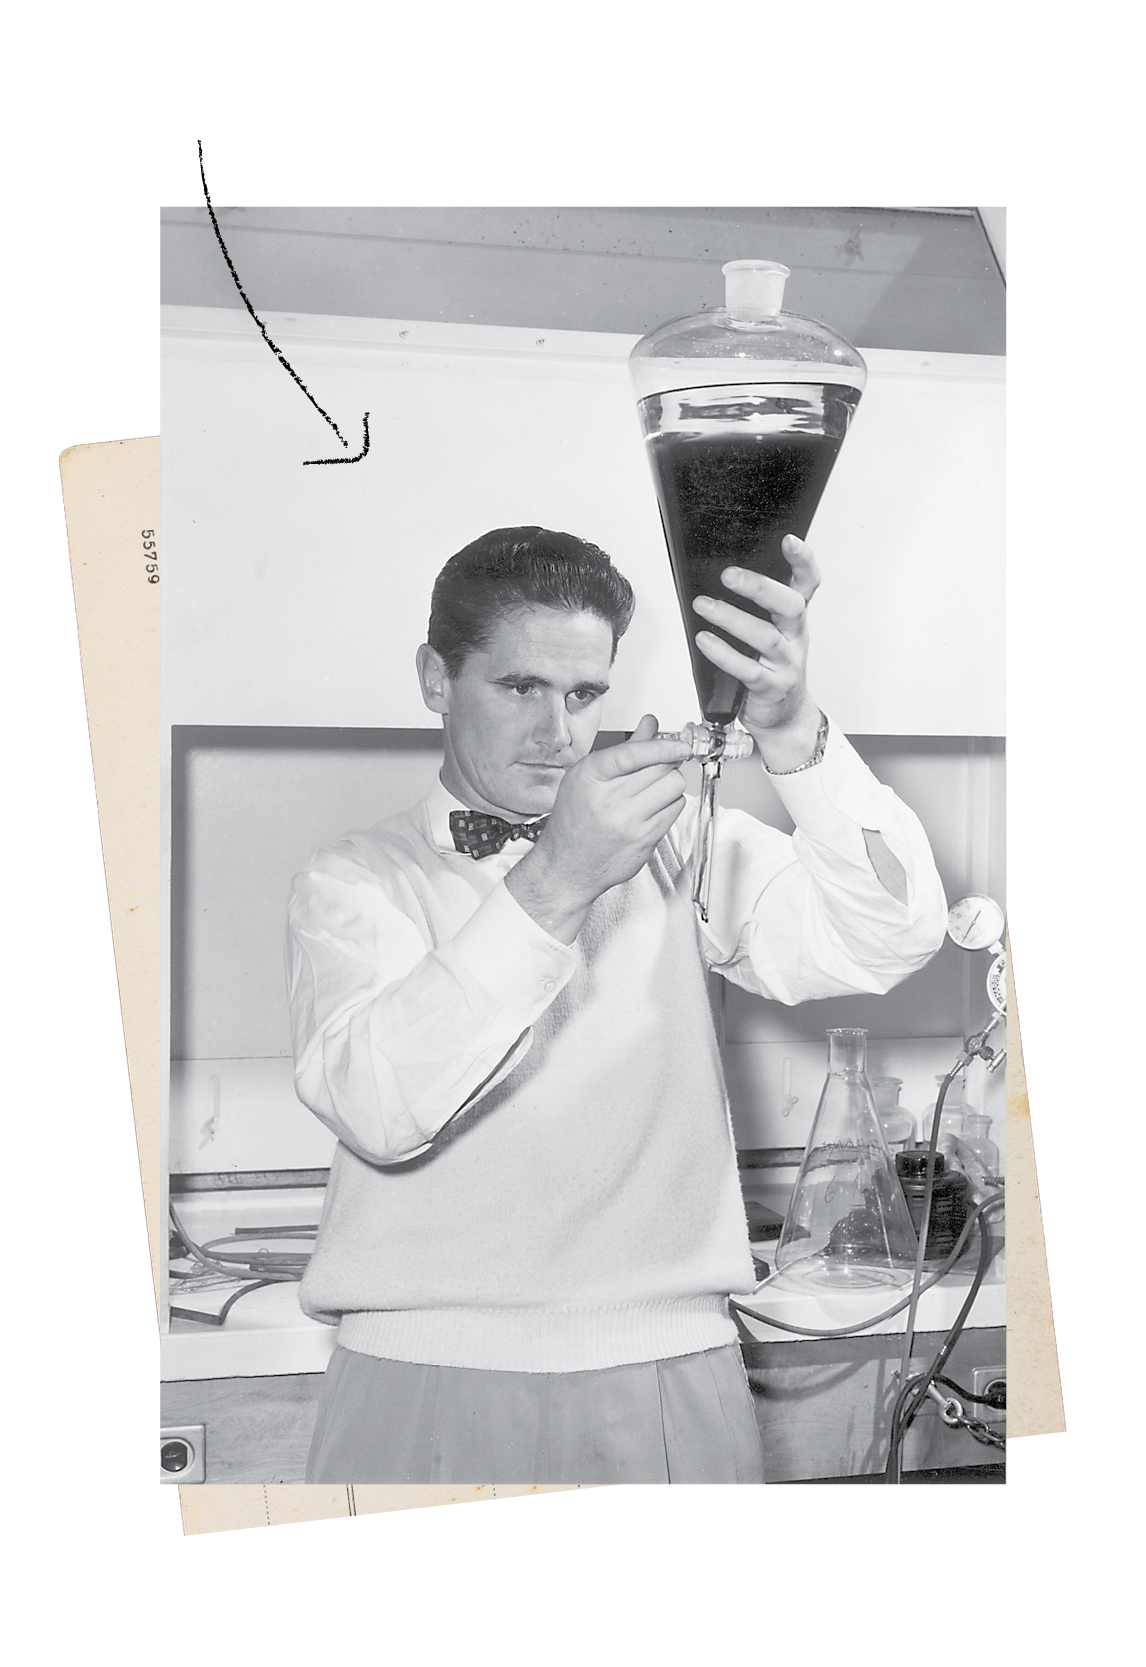 A black and white photograph of Biochemist Donald J. Cram wearing a bow tie as he works with equipment in a lab.